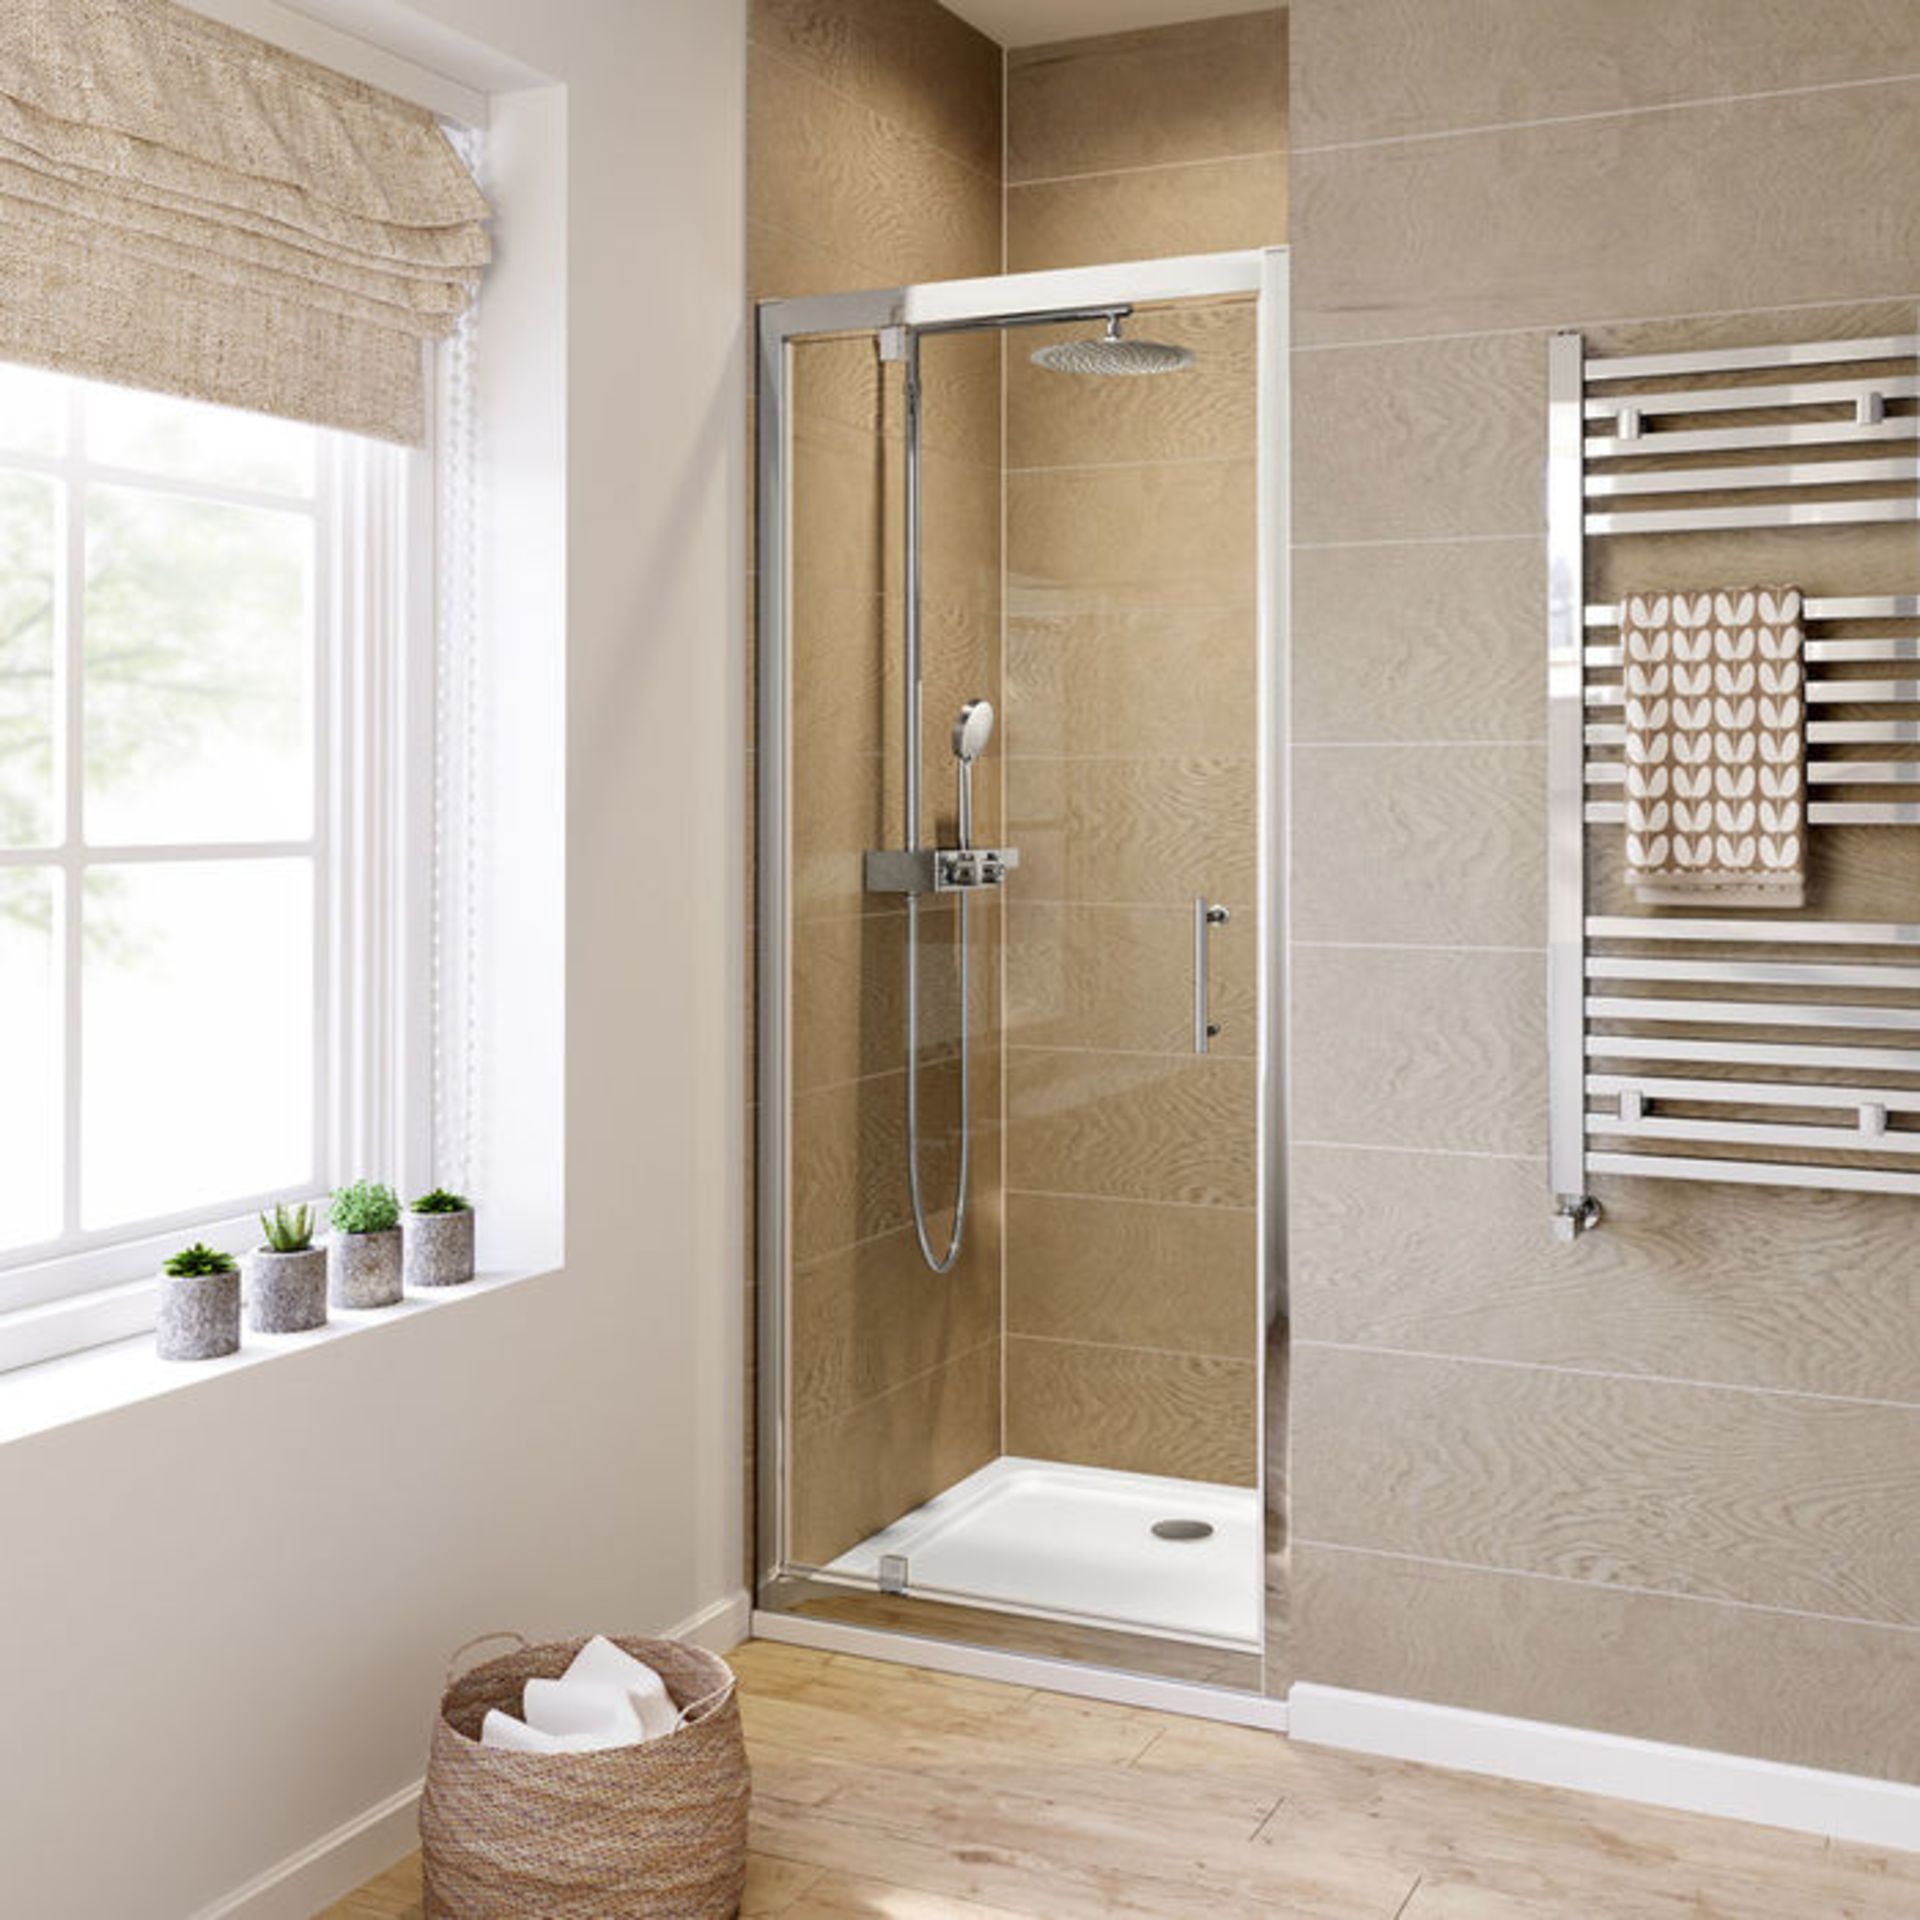 (VN27) 900mm - 6mm - Elements Pivot Shower Door. RRP £299.99. 6mm Safety Glass Fully waterproof - Image 4 of 5